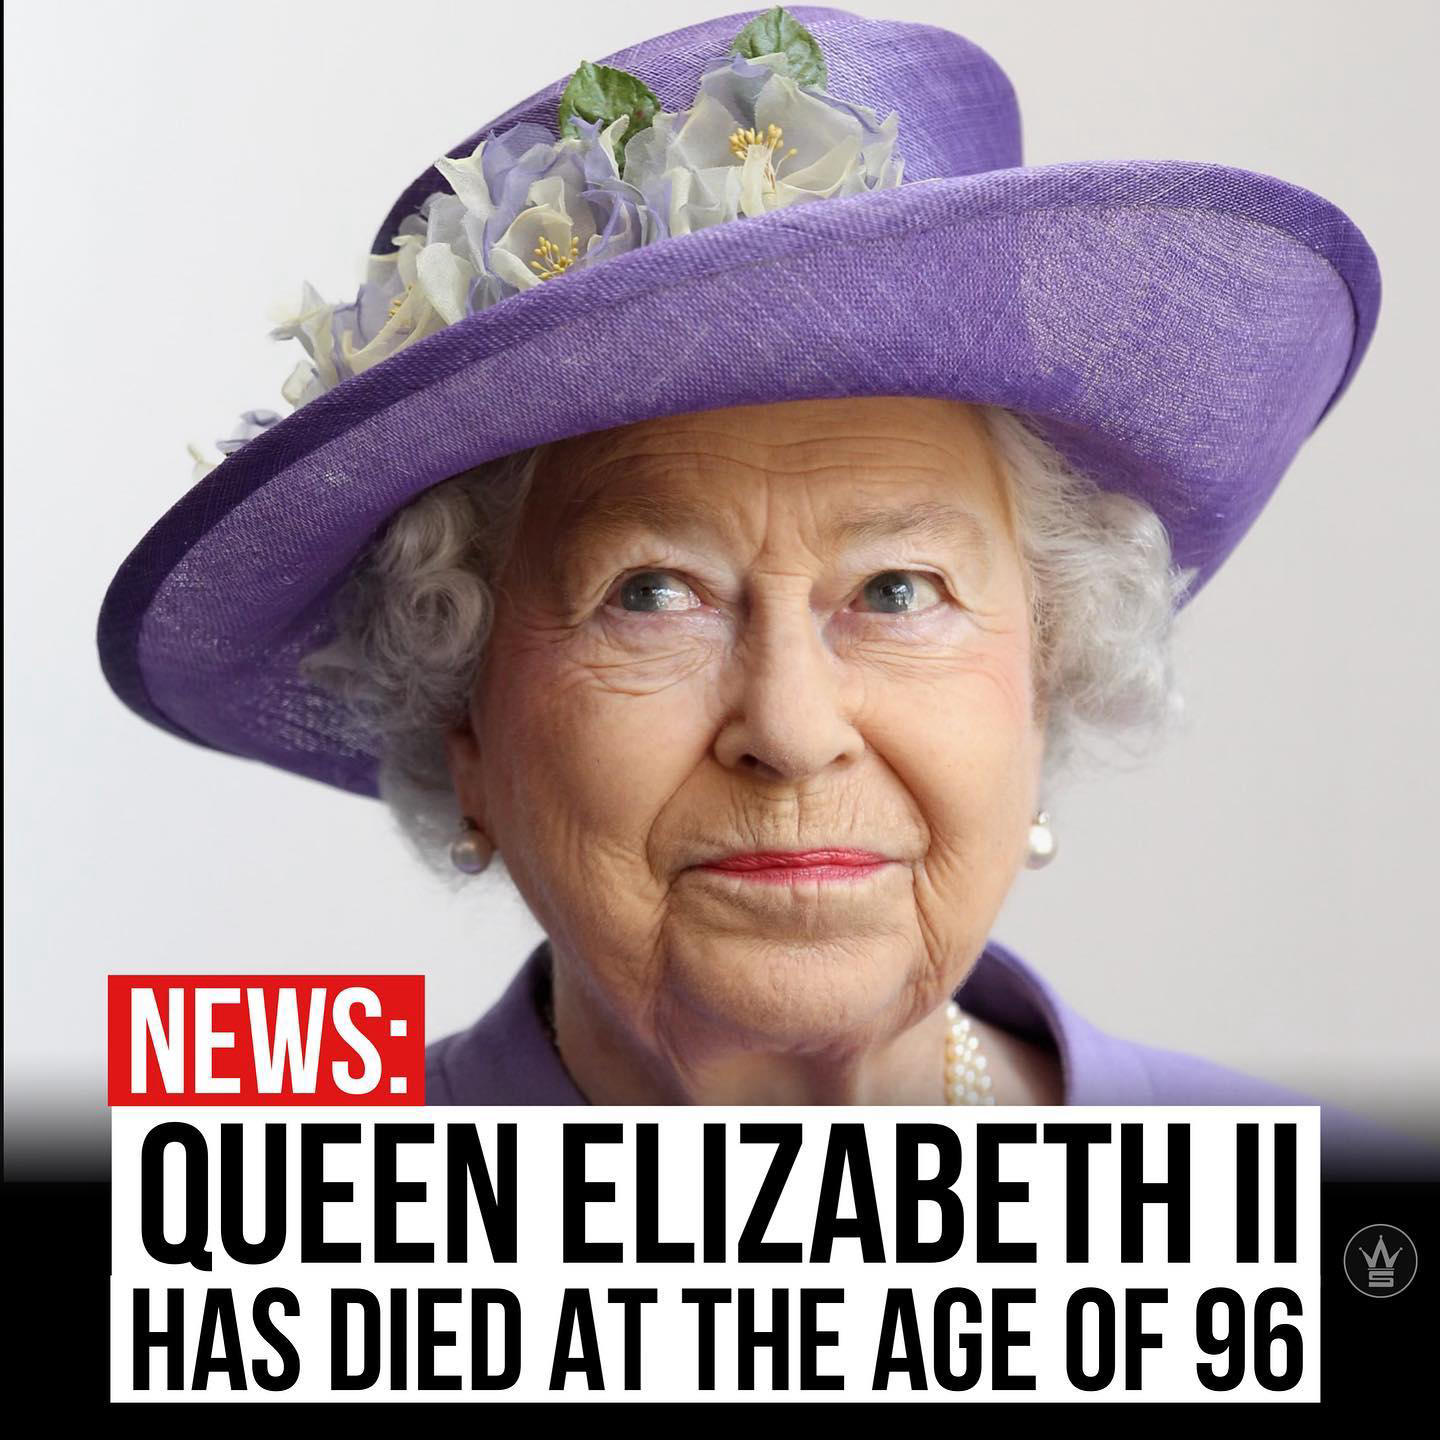 image  1 WorldStar Hip Hop / WSHH - According to reports, Queen Elizabeth II has died at the age of 96 after